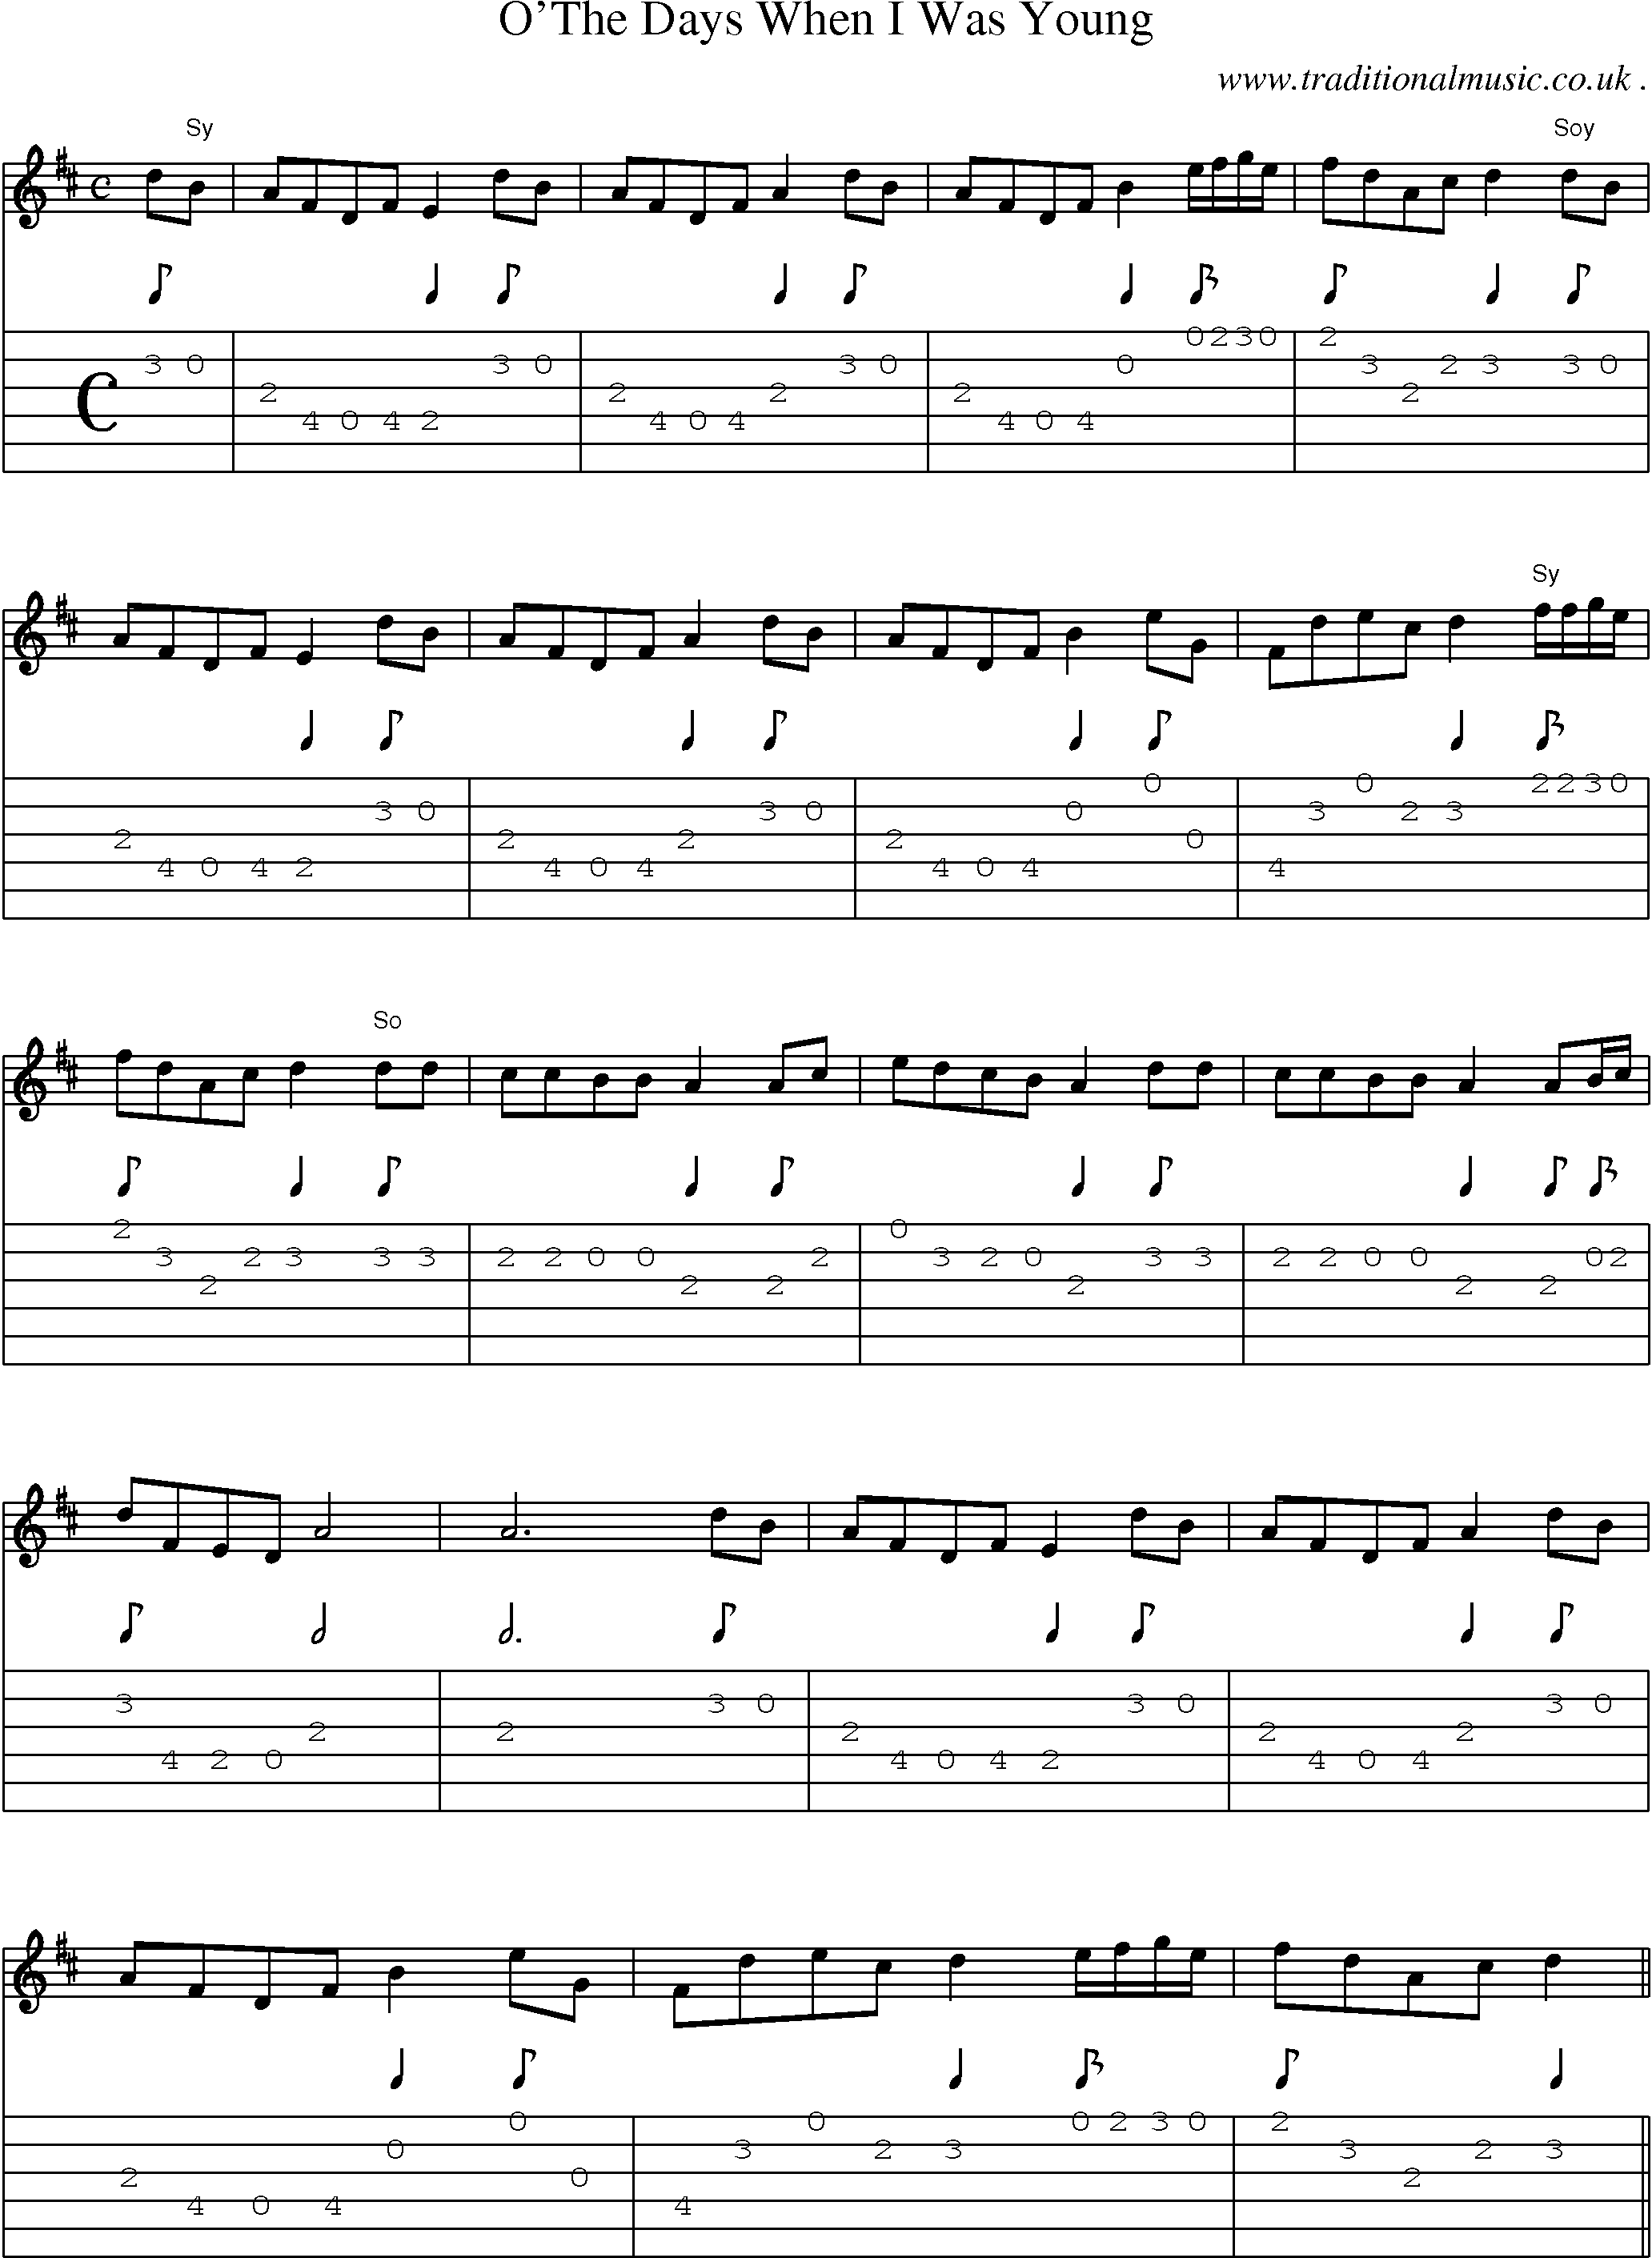 Sheet-Music and Guitar Tabs for Othe Days When I Was Young